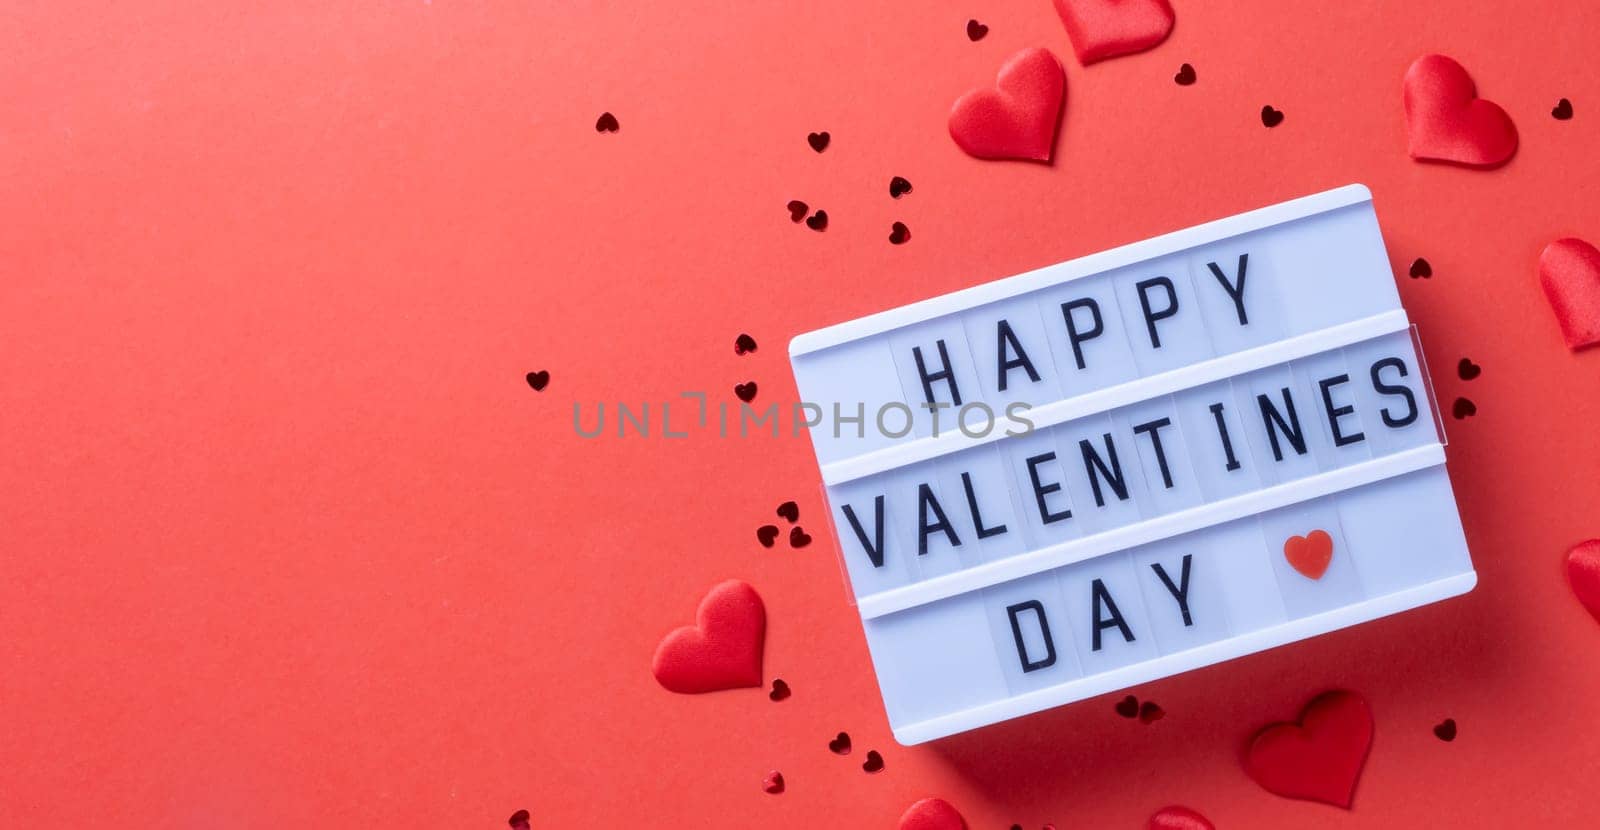 Valentines day. letter board with words Happy Valentines Day an heart shape confetti on red background